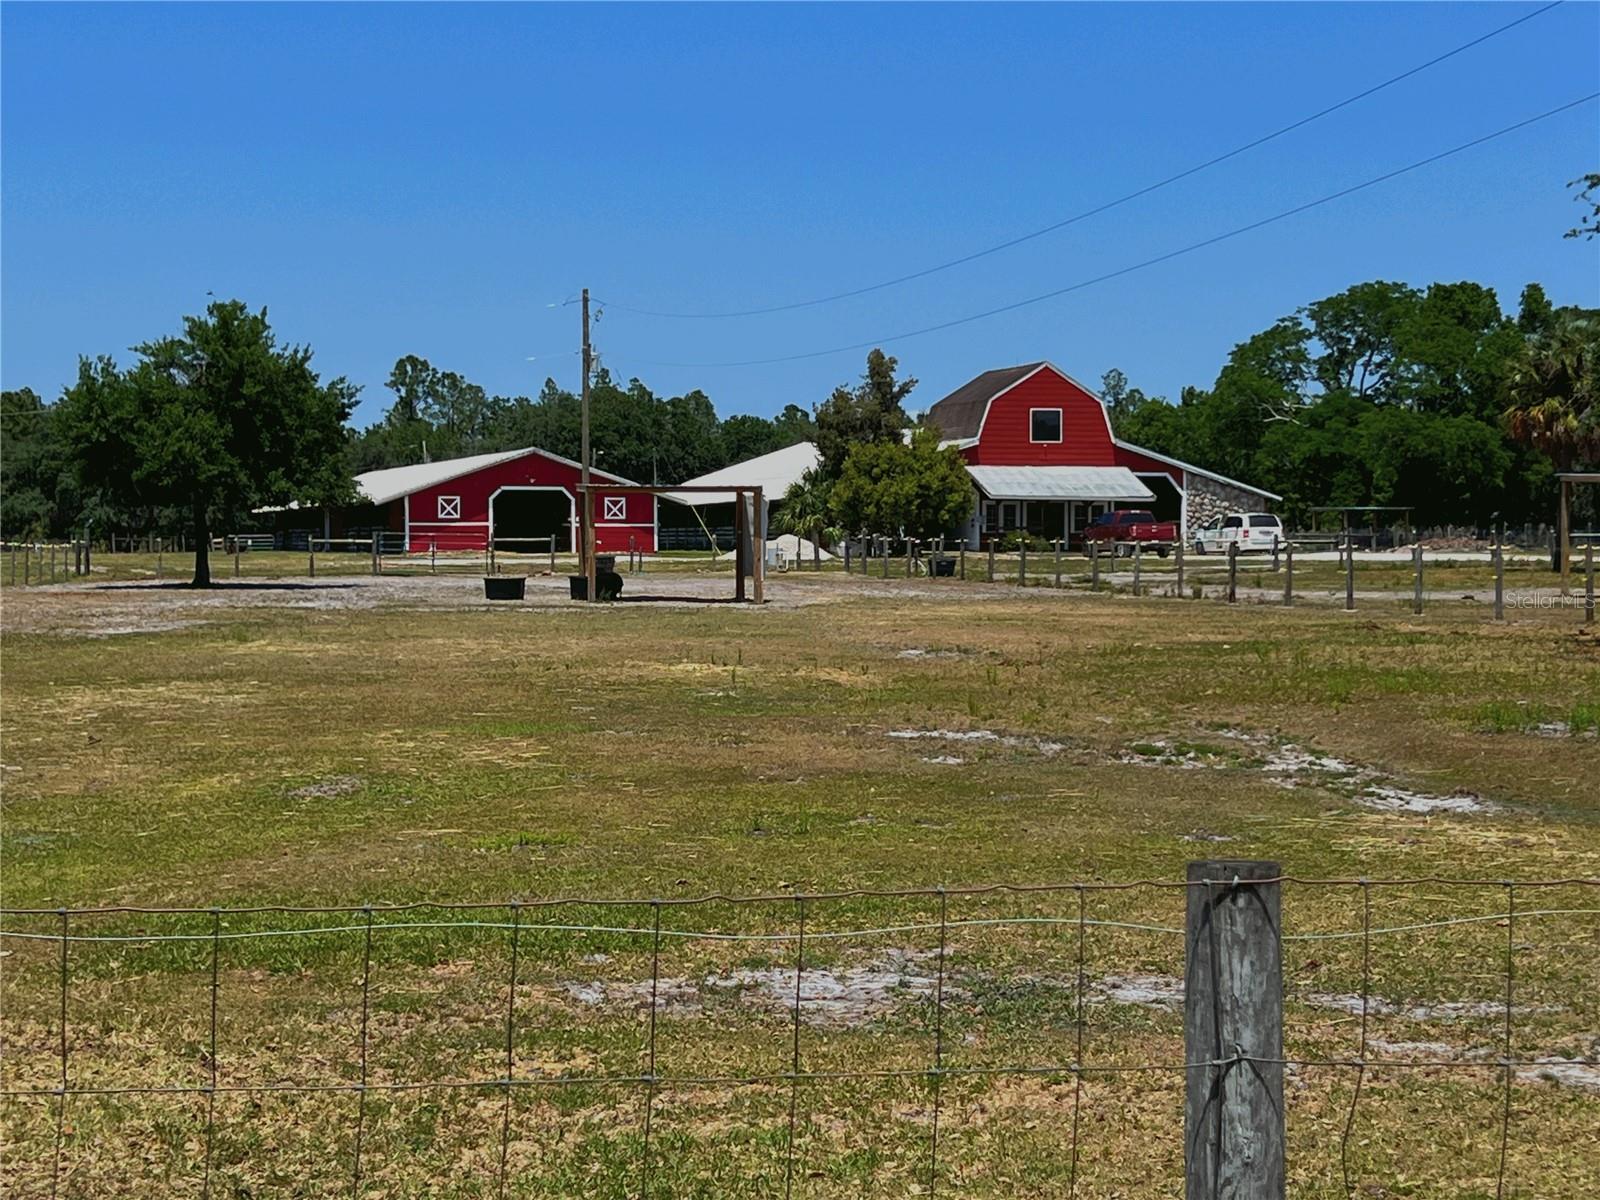 The Sundance Stables are located at 532 Sundance Trail. There are two barns with 40 stalls, a round pen, a practice arena, 9 fully fenced pastures and plenty of tack space.